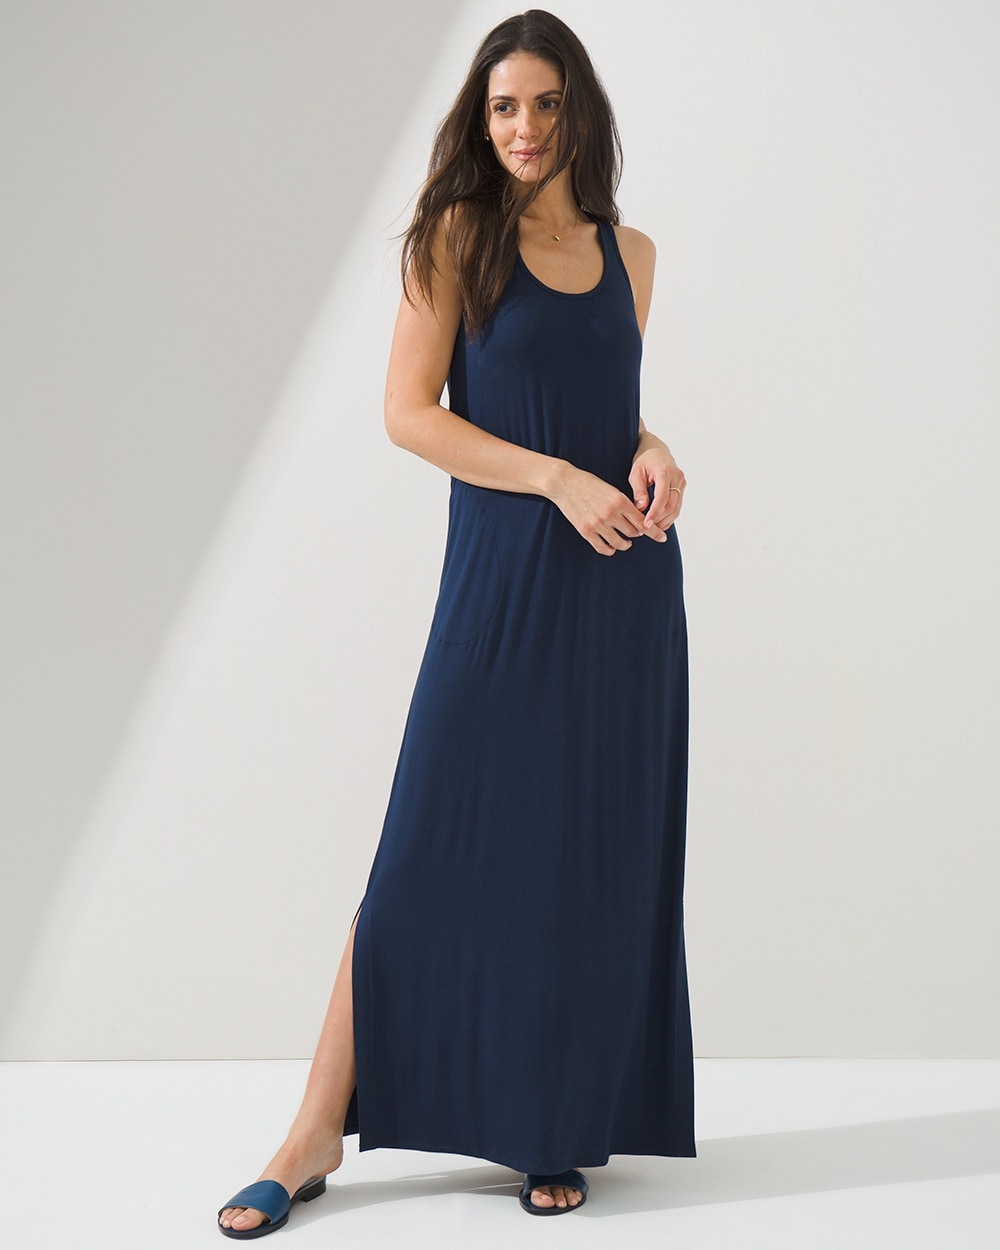 Racerback Maxi Dress with Built-In Bra